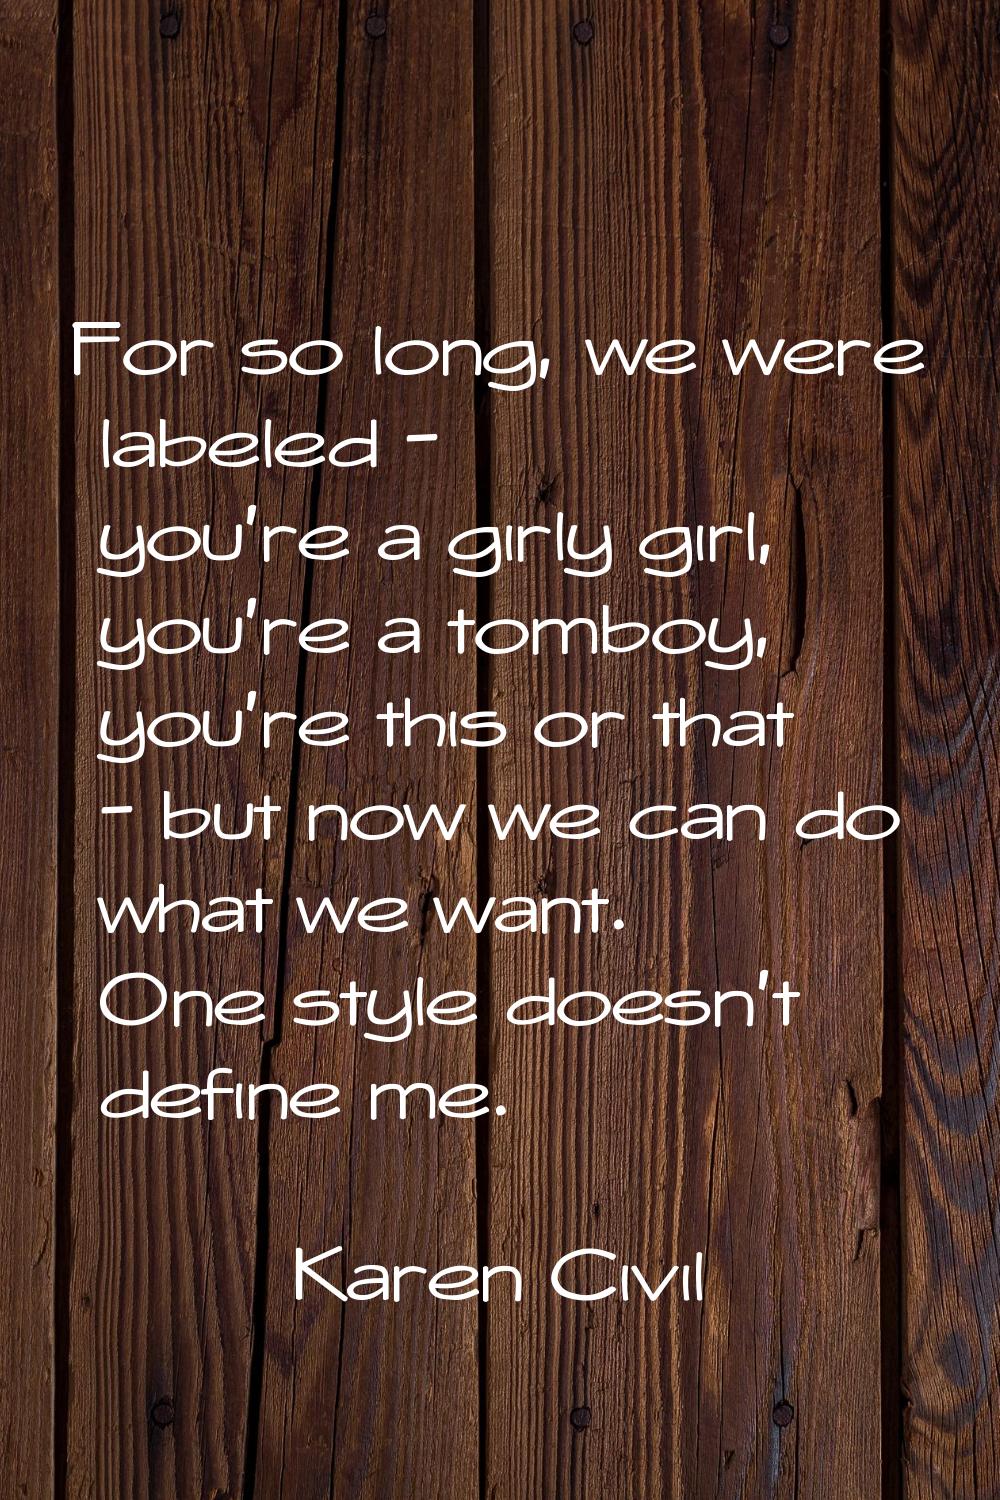 For so long, we were labeled - you're a girly girl, you're a tomboy, you're this or that - but now 